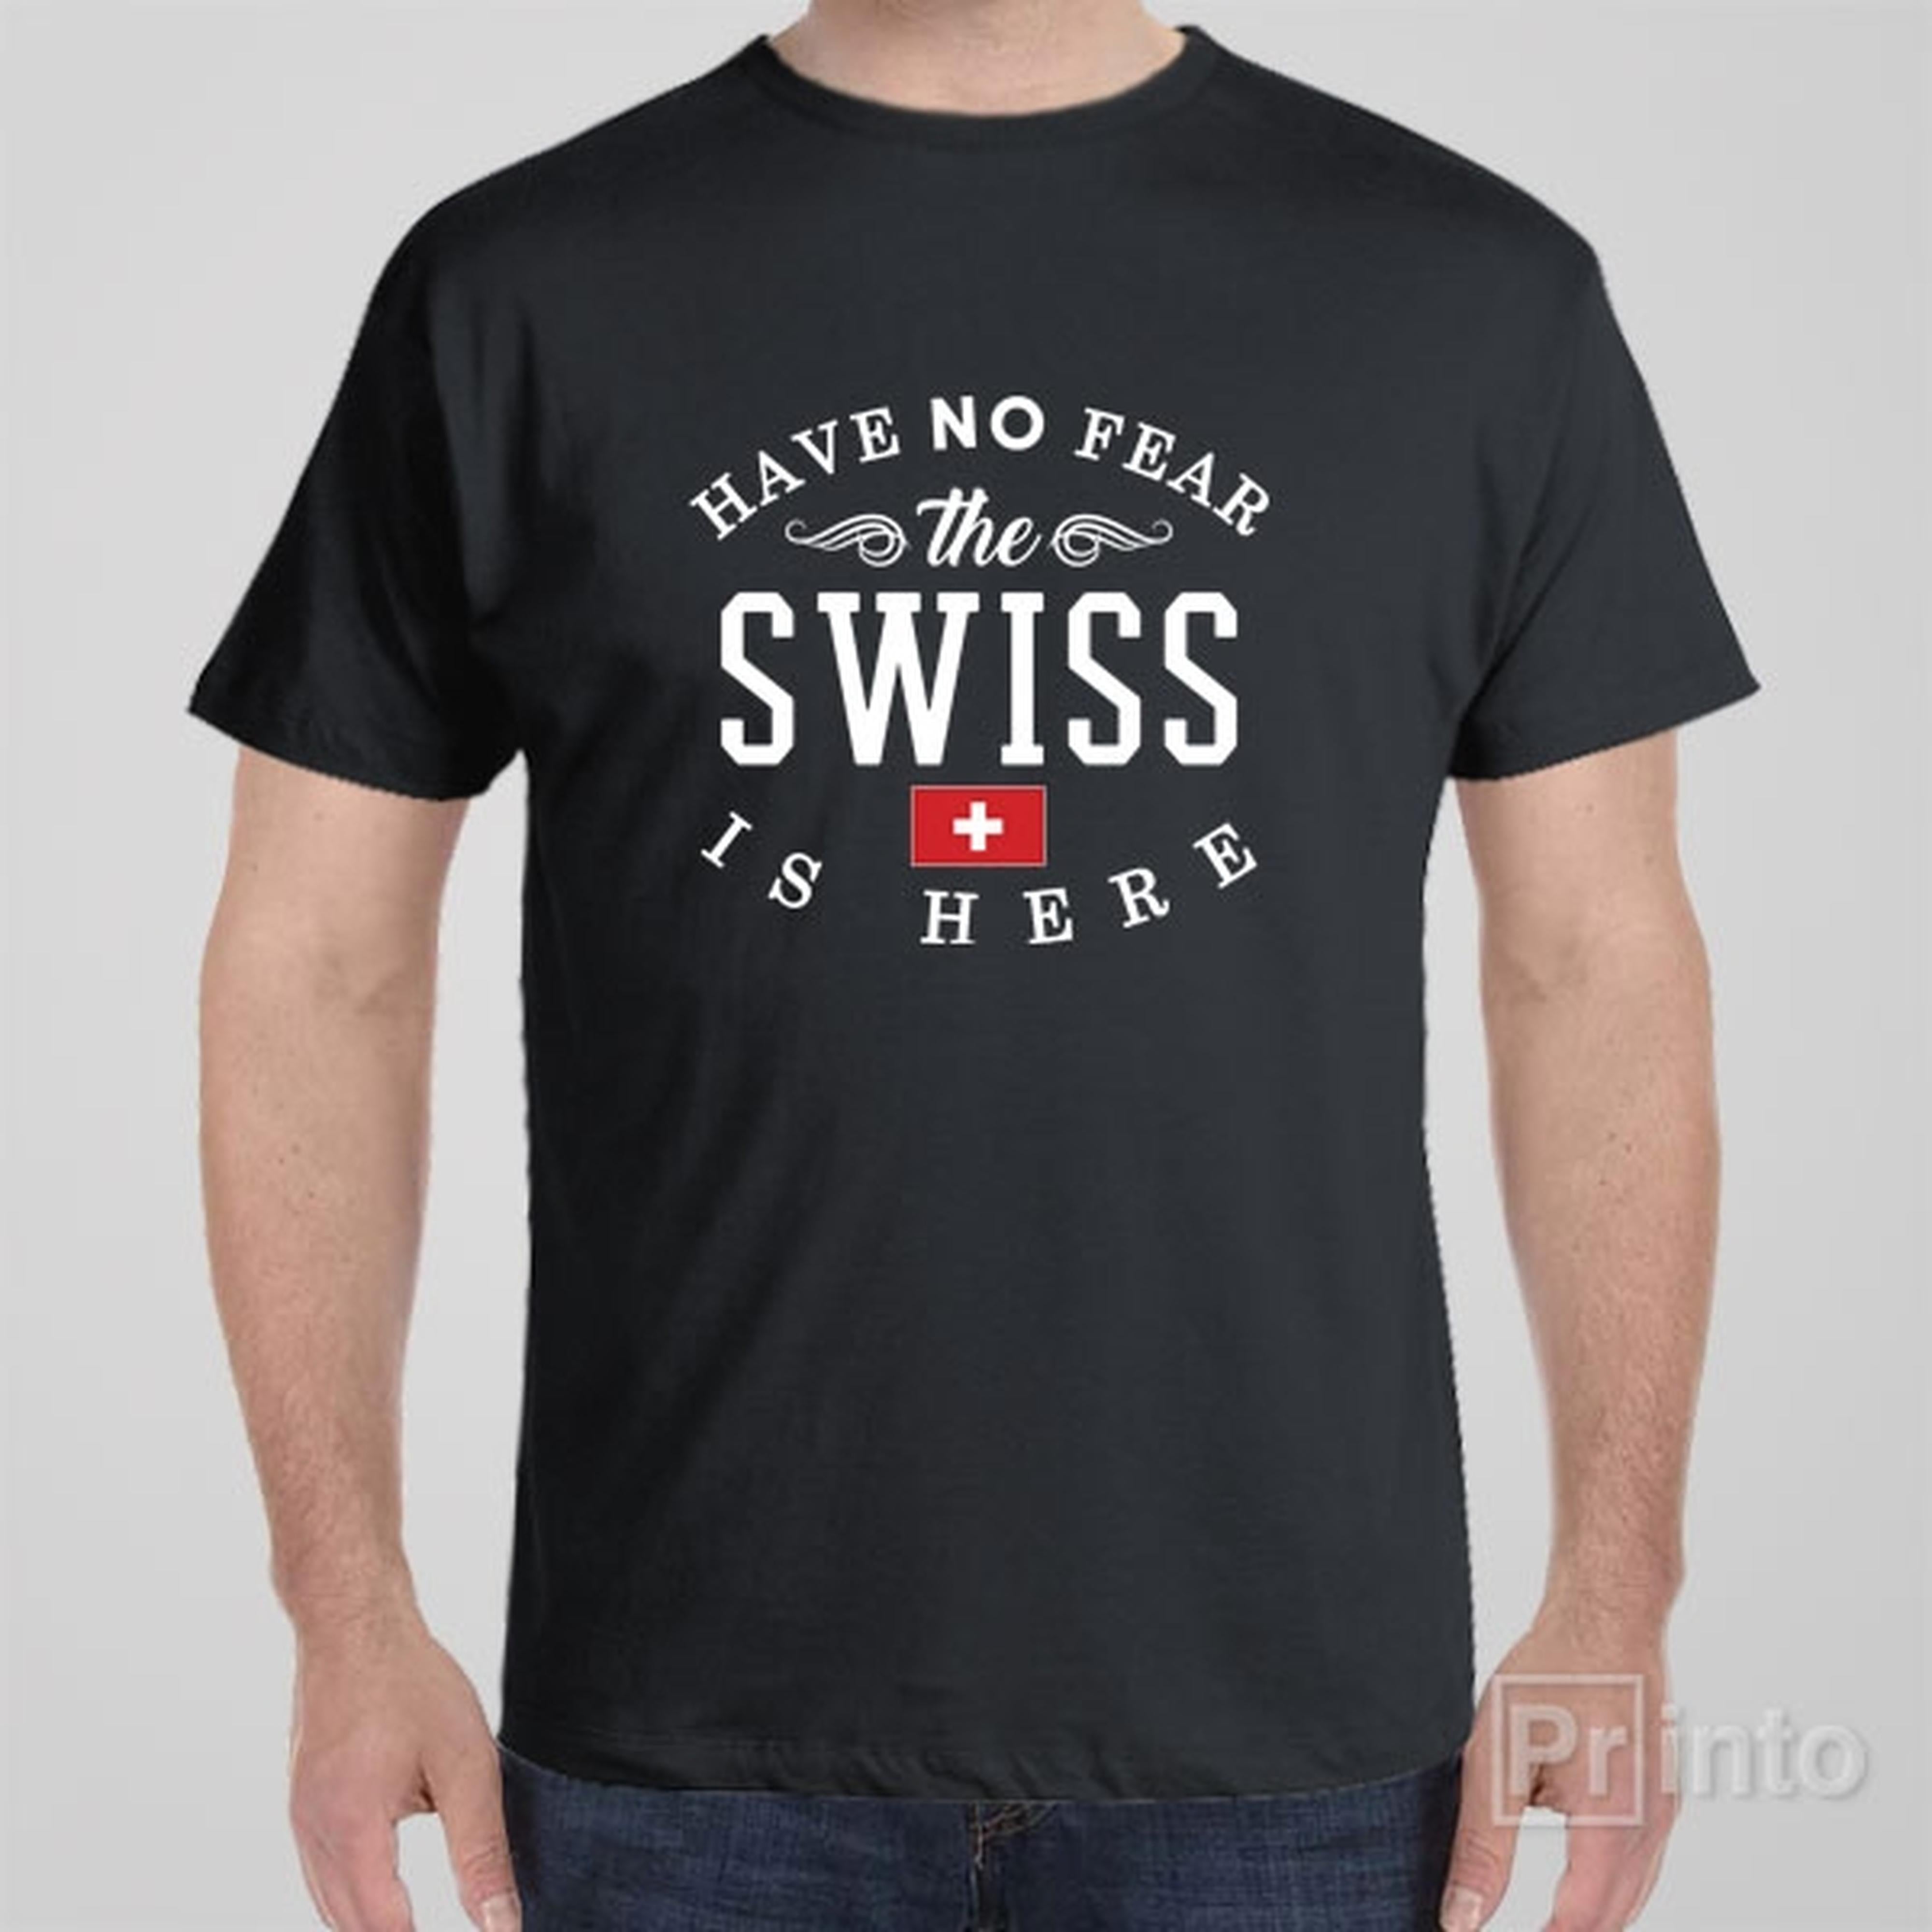 have-no-fear-the-swiss-is-here-t-shirt